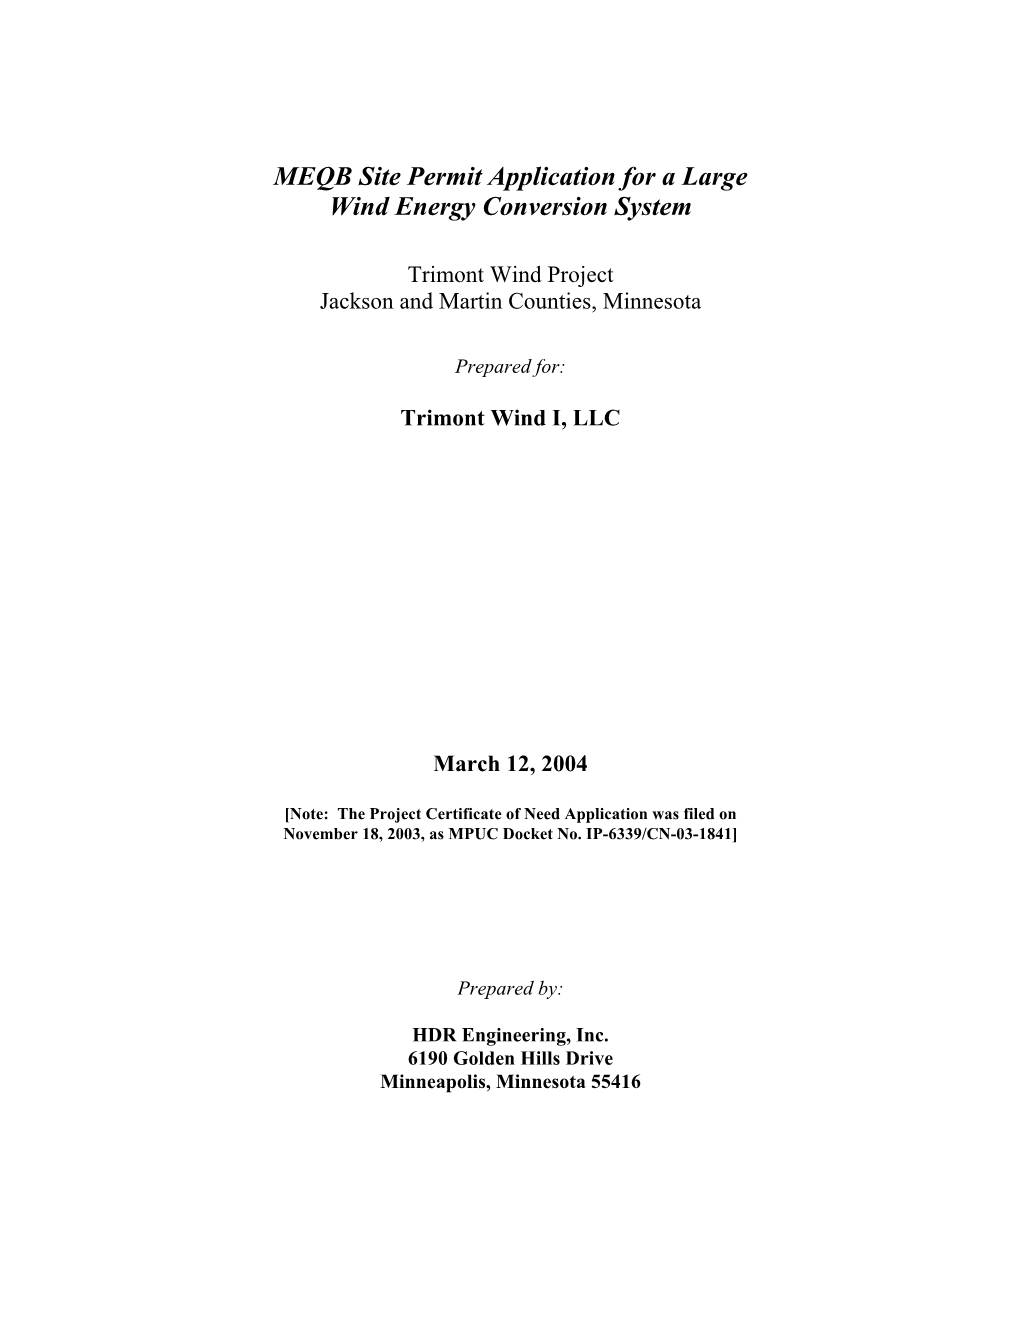 MEQB Site Permit Application for a Large Wind Energy Conversion System